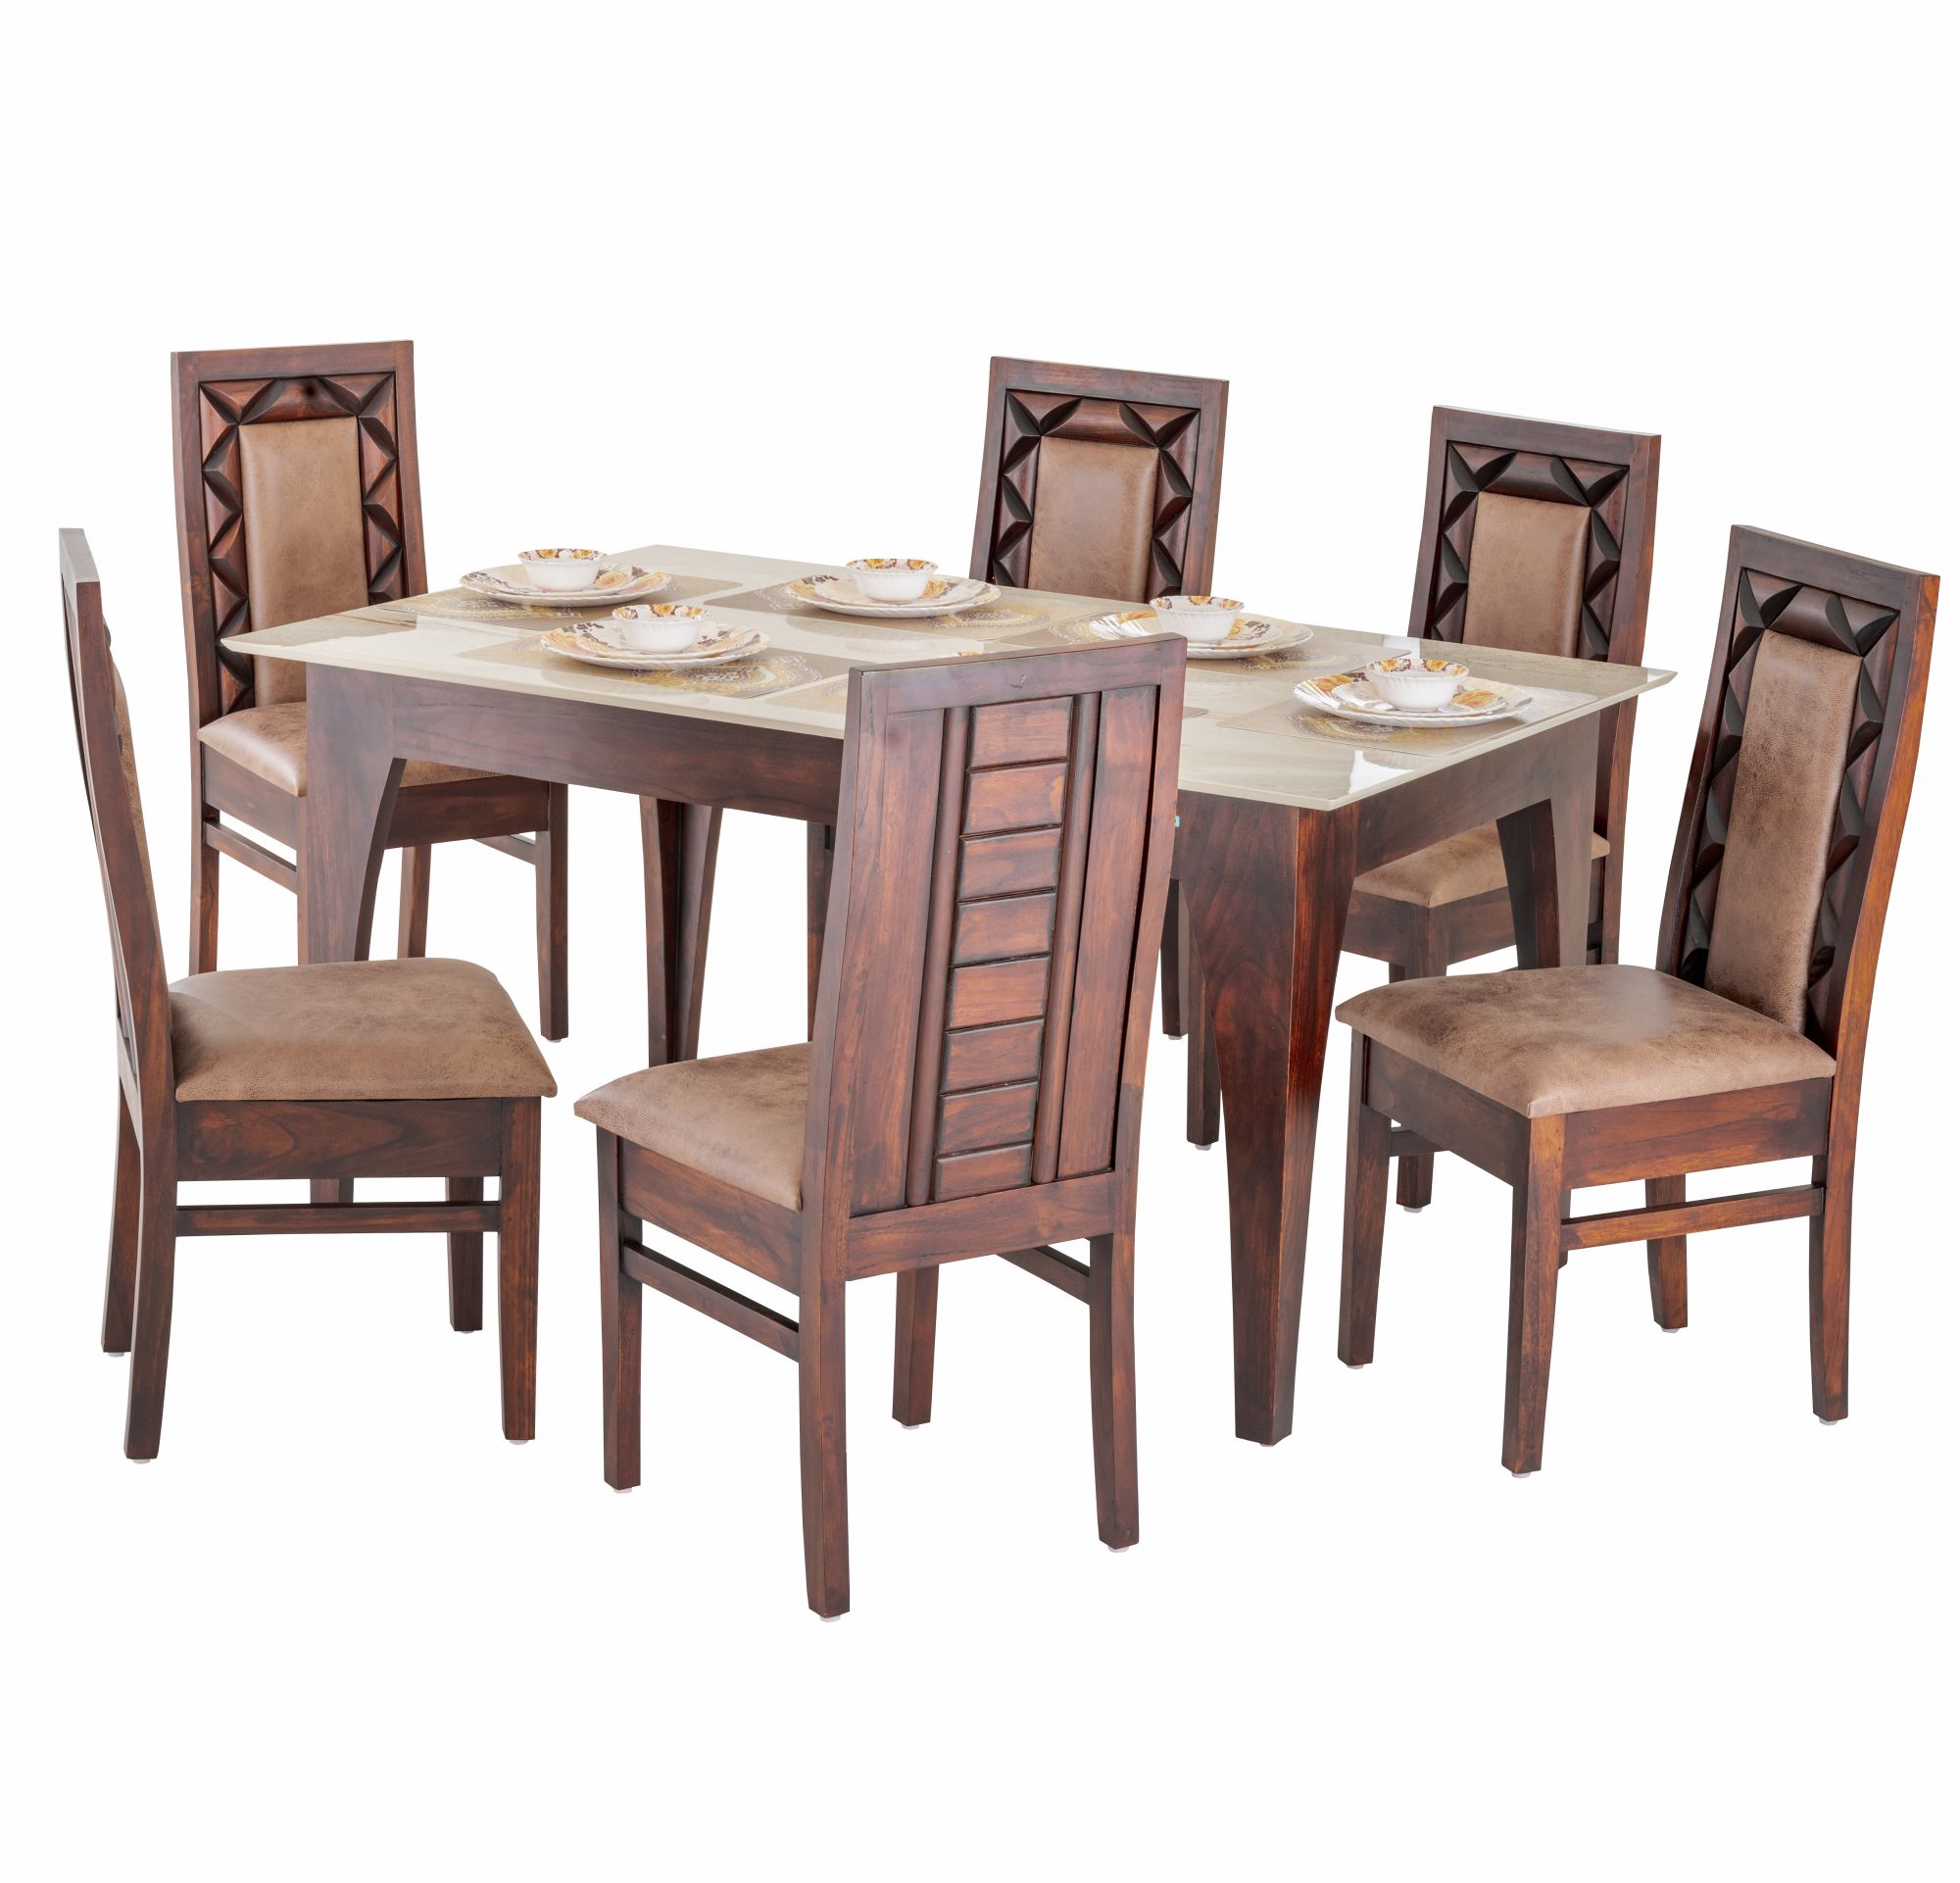 Henry 6 Seater Dining Set